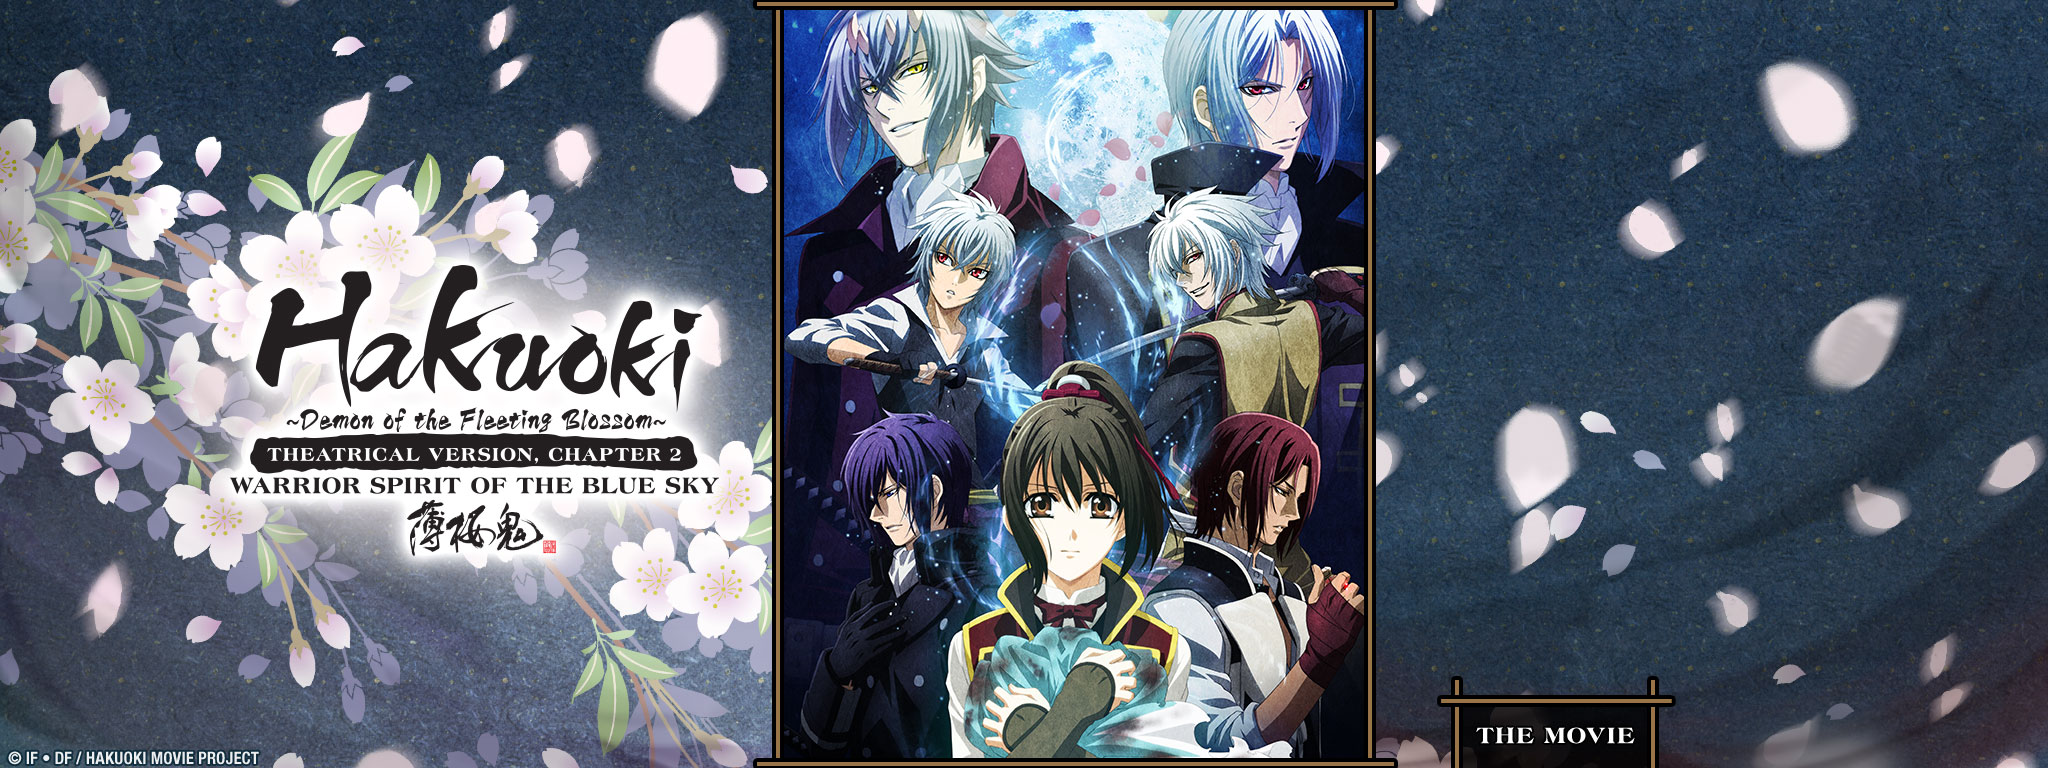 Title Art for Hakuoki - Theatrical Version, Chapter 2: Warrior Spirit of the Blue Sky